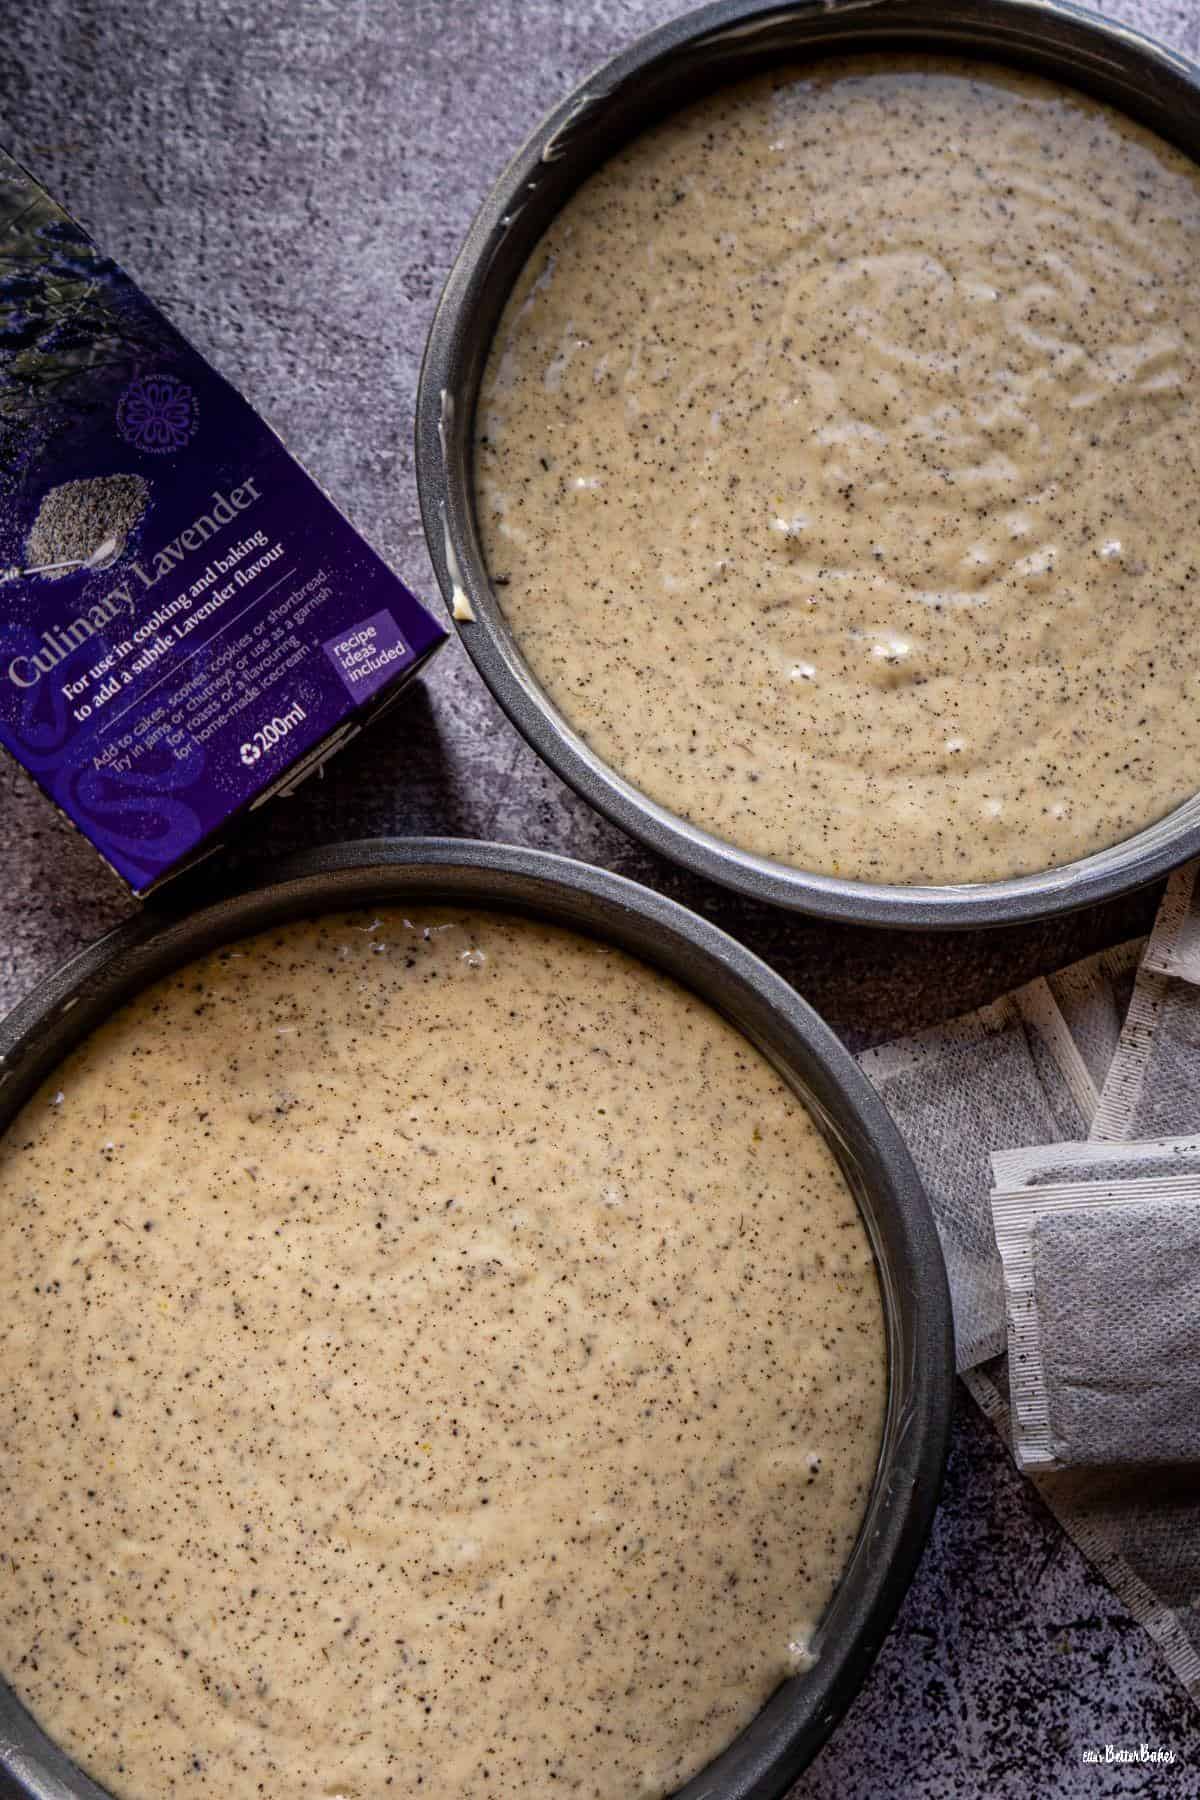 lavender and earl grey cake batter in tins